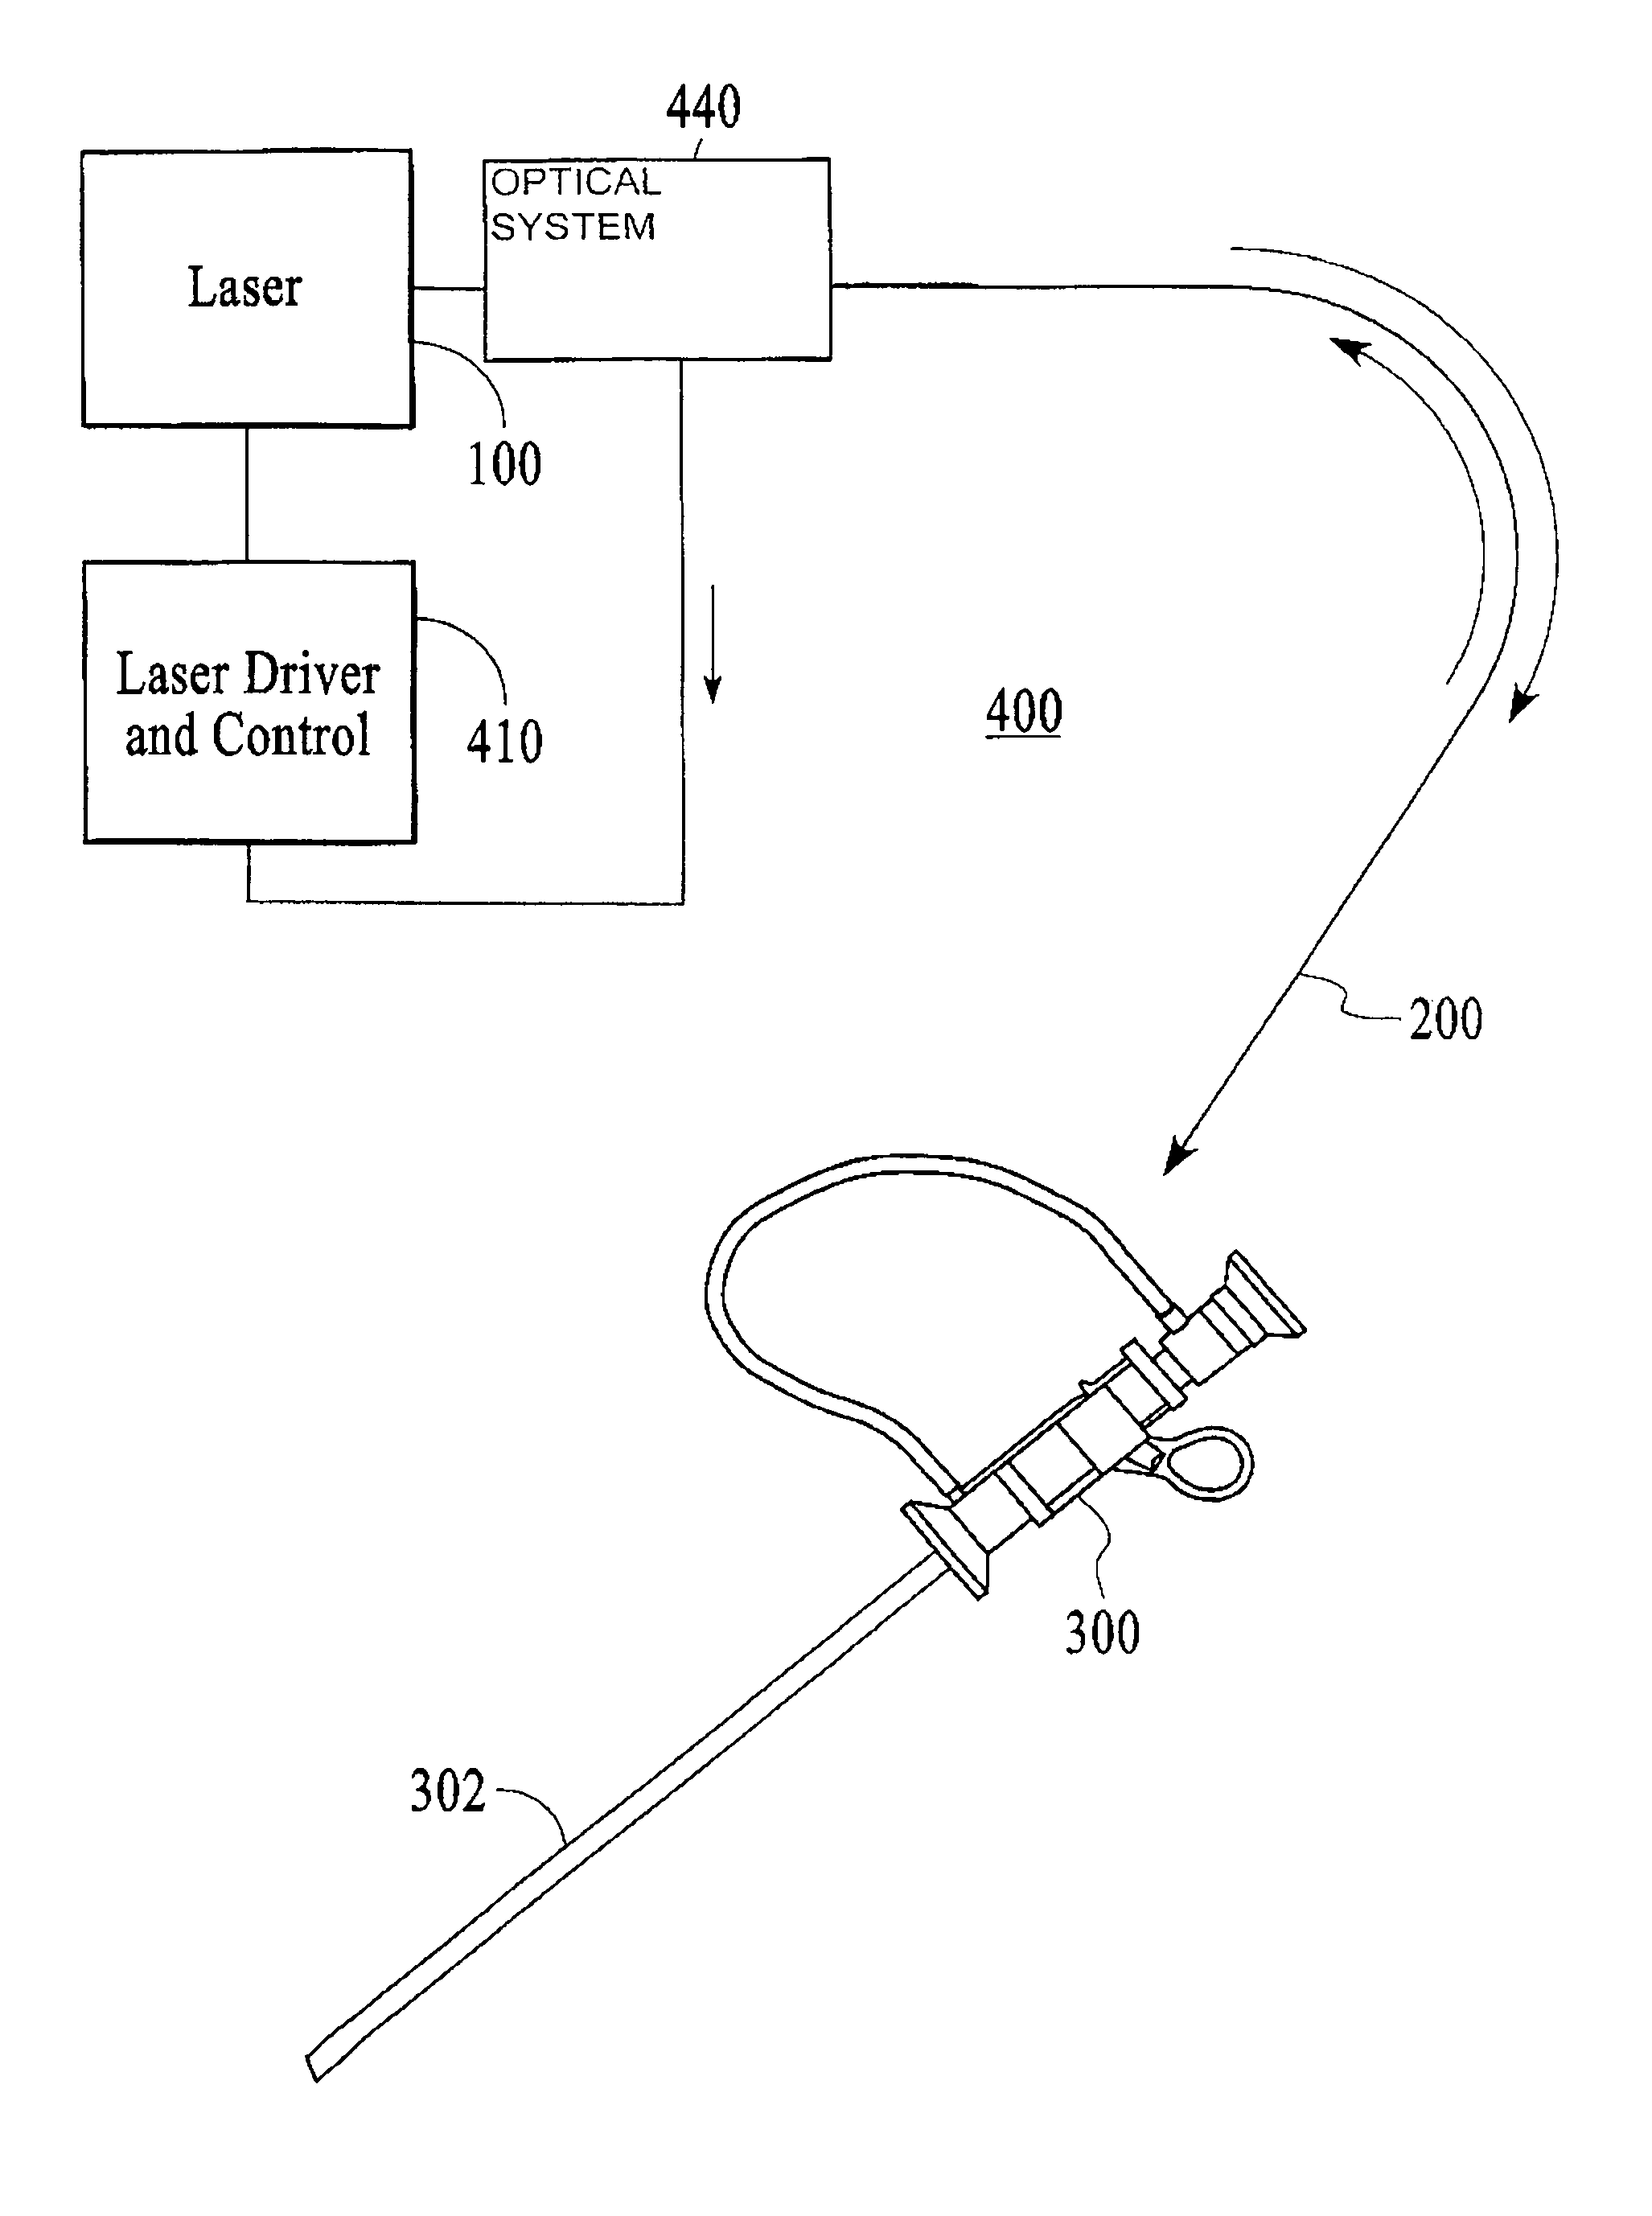 Contact laser apparatus for ablation of tissue